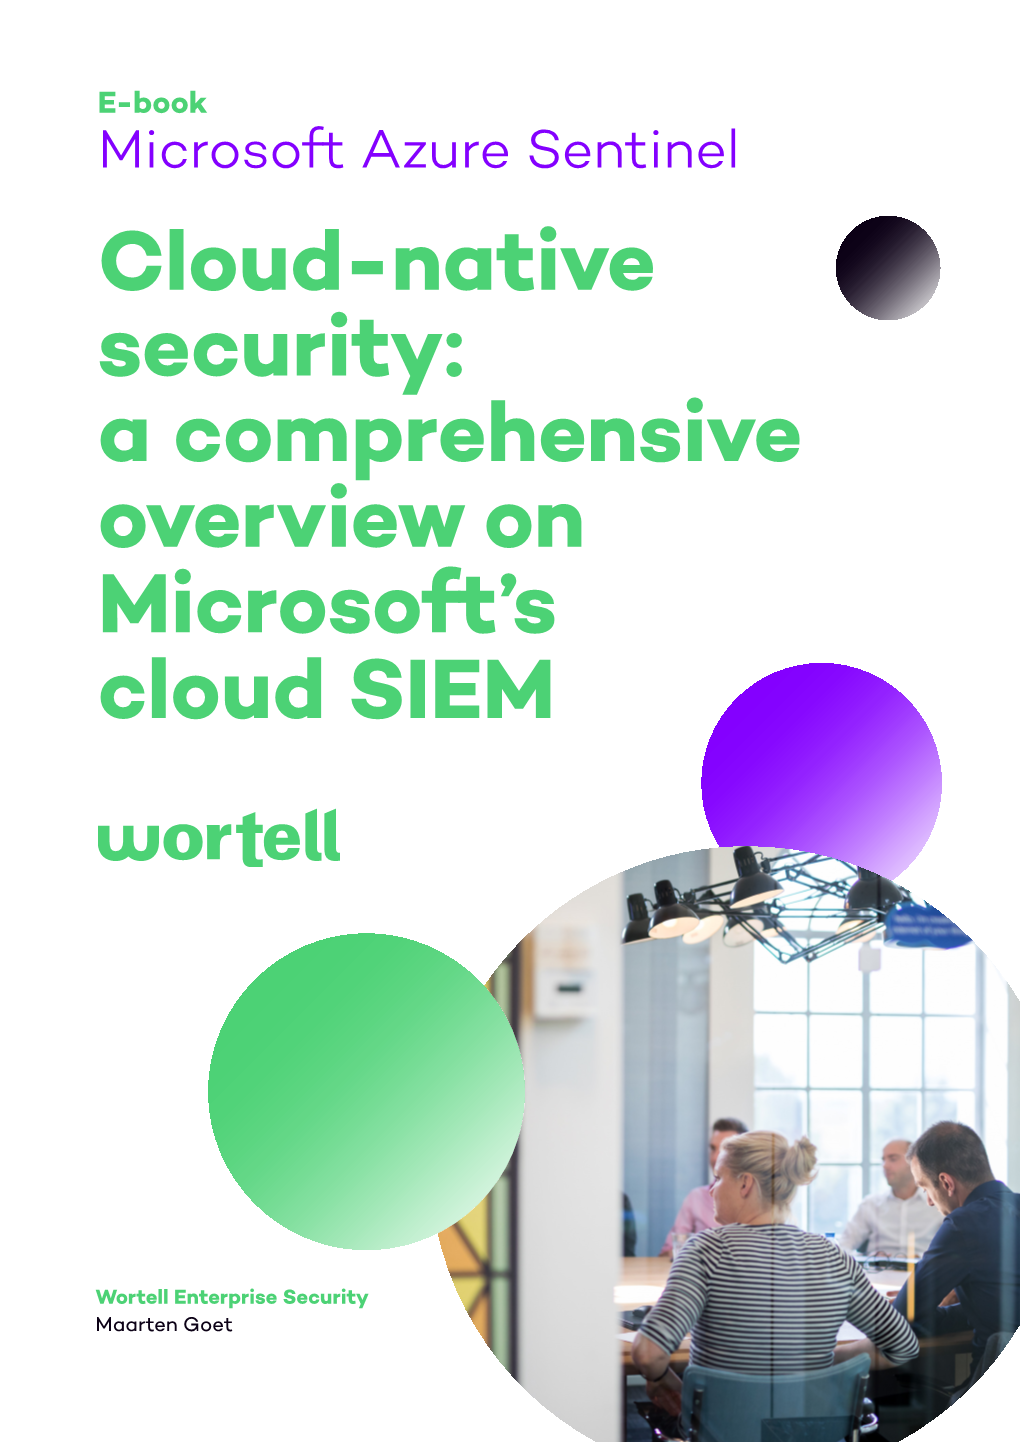 A Comprehensive Overview on Microsoft's Cloud SIEM